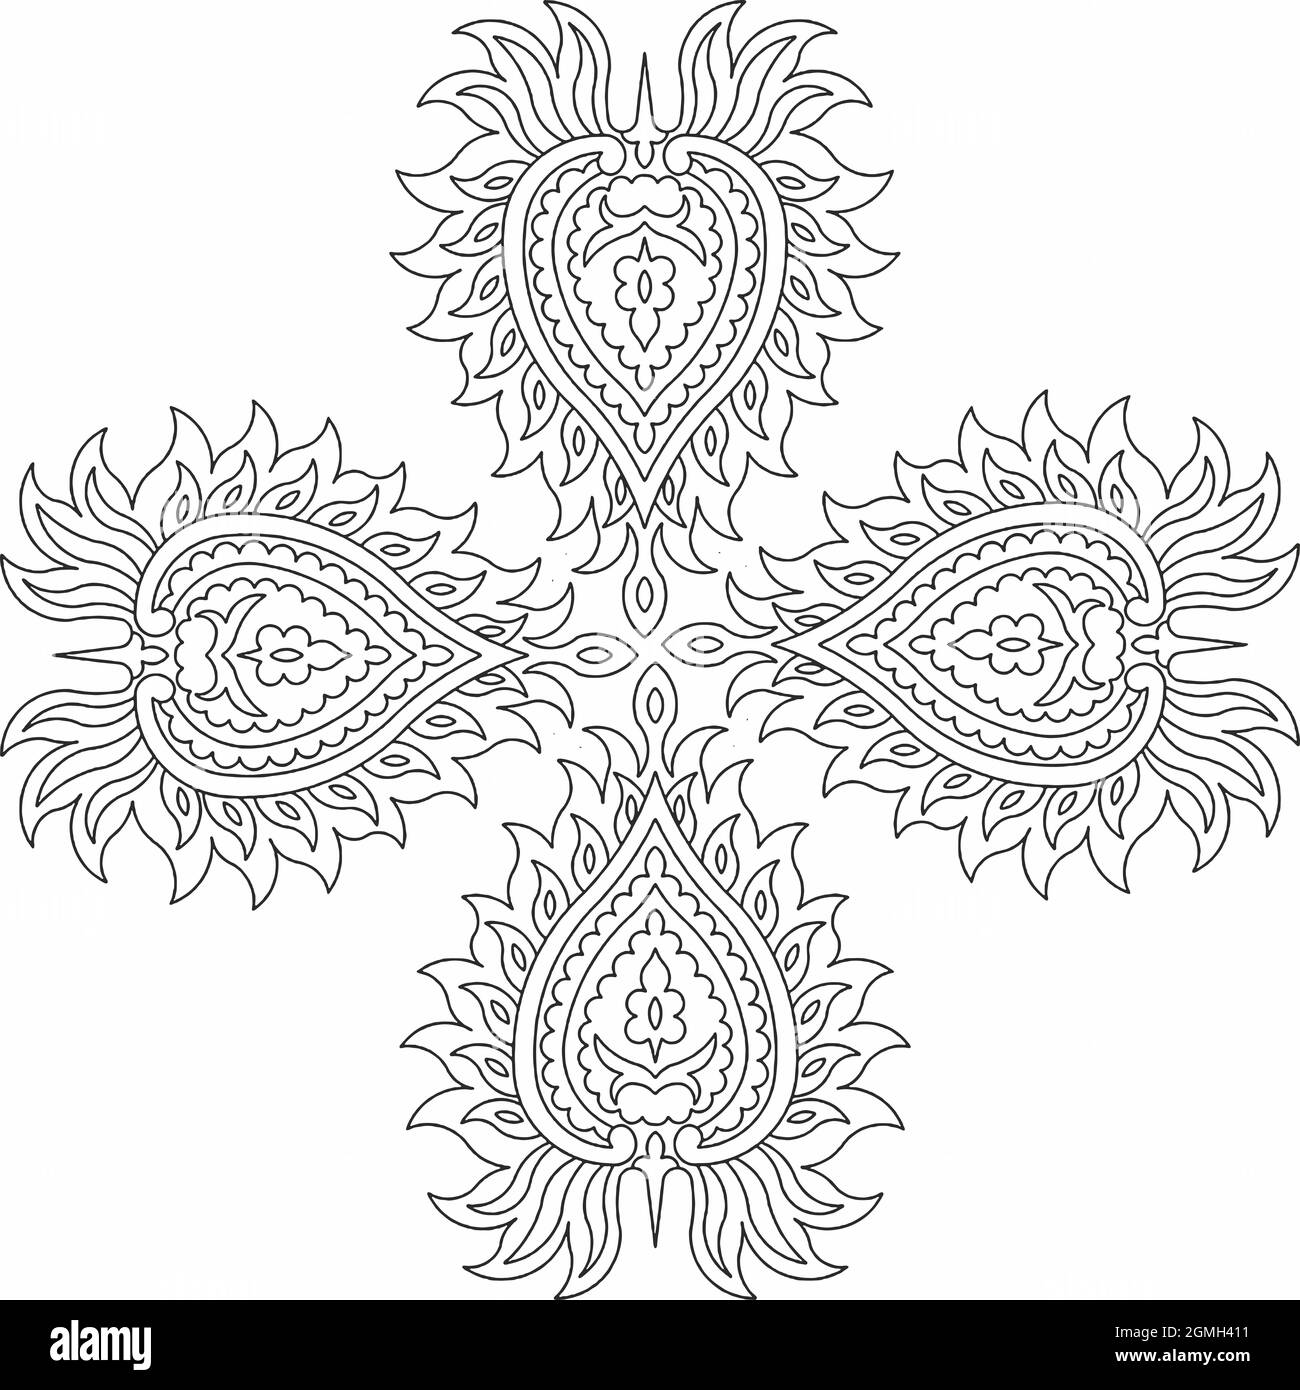 City Seamless Pattern Isometric Doodle Drawing Stock Vector Royalty Free  399671629  Shutterstock